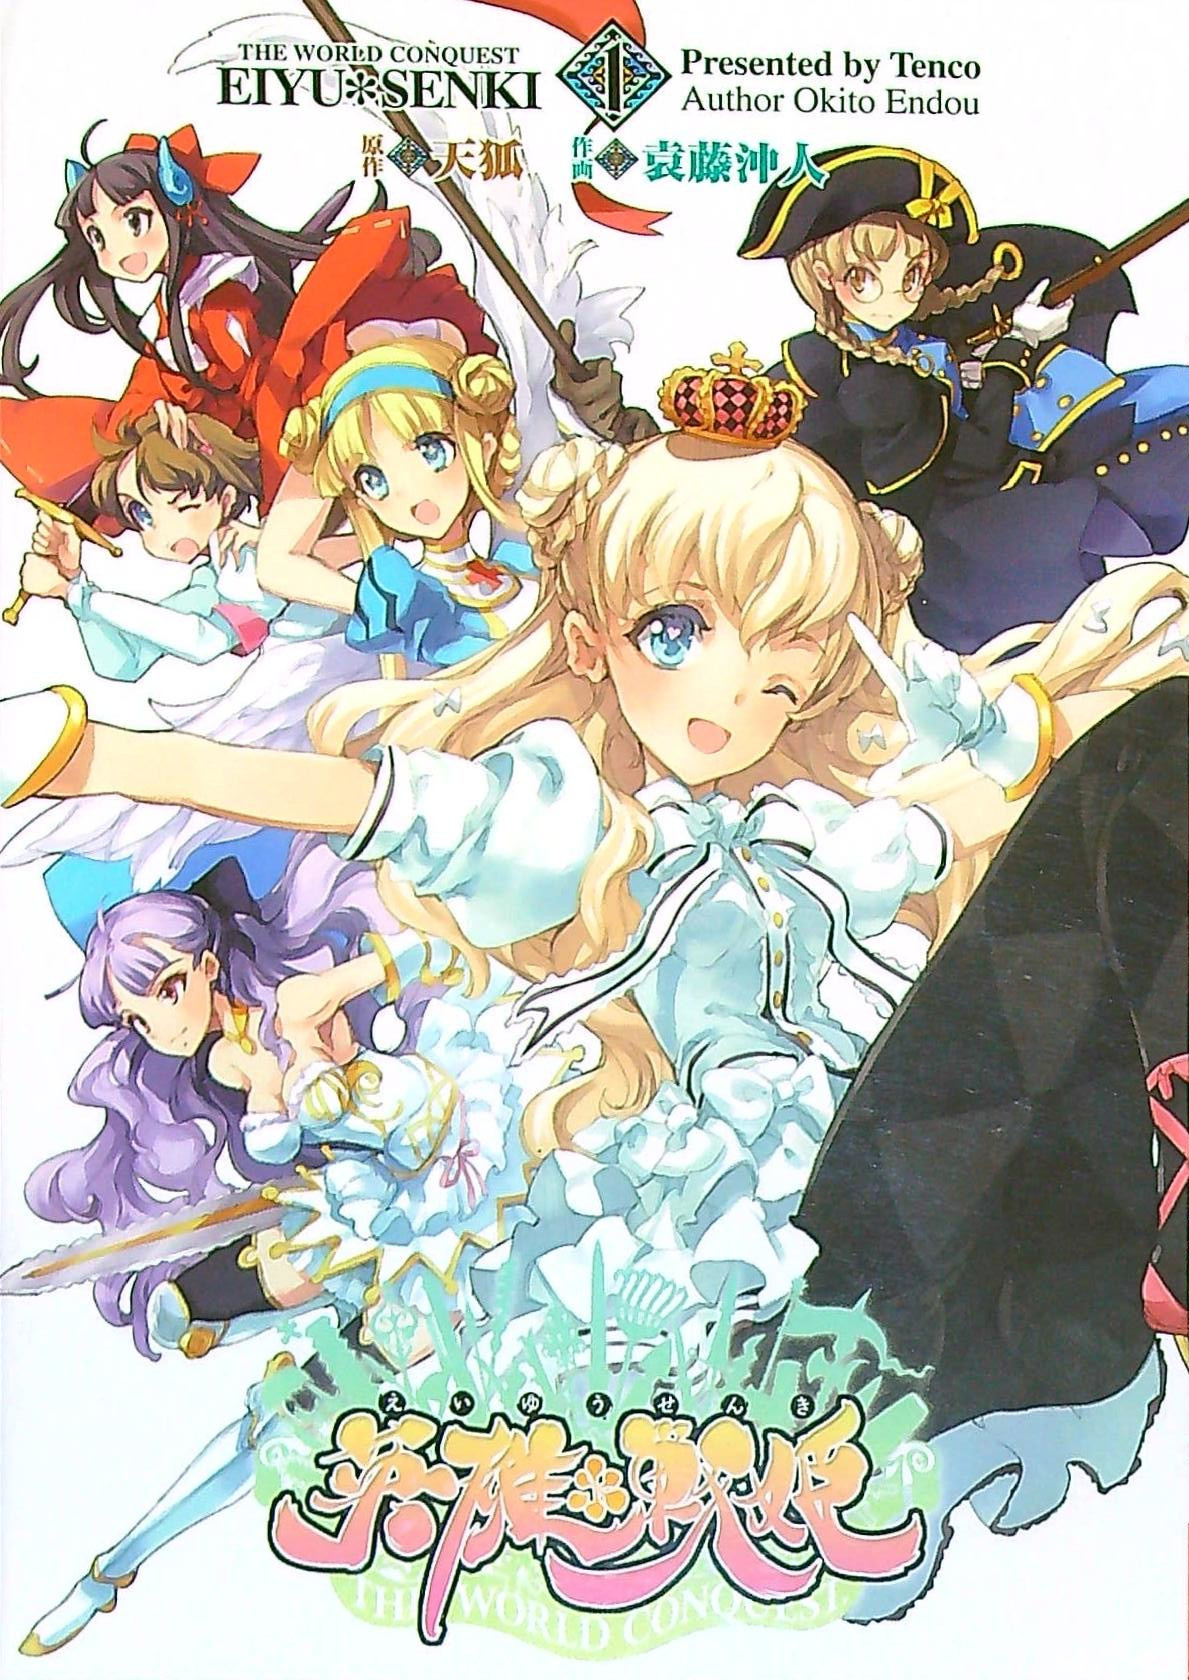 Eiyuu*senki - The World Conquest Vol.1 Chapter 1: Zipang Unification Battle Line - Picture 1